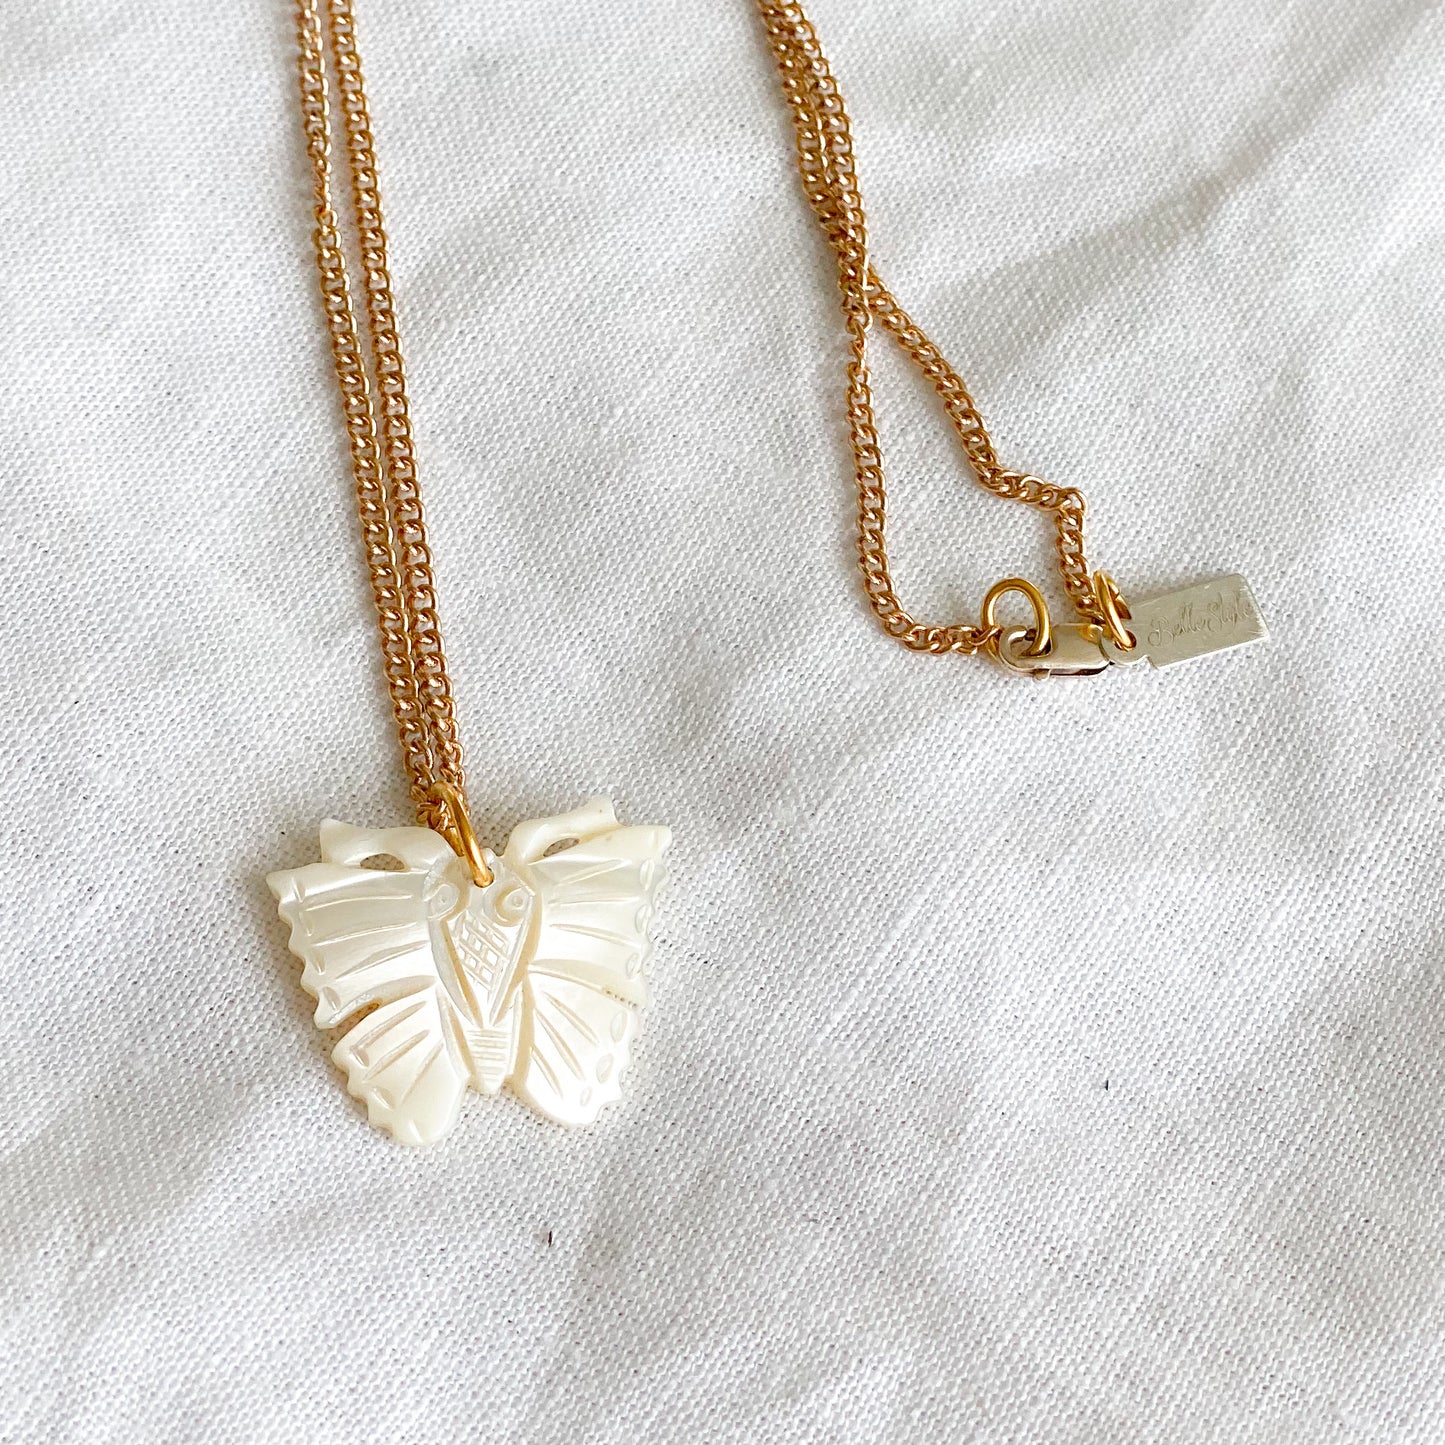 Butterfly Mother of Pearl Charm Necklace - Bellestyle